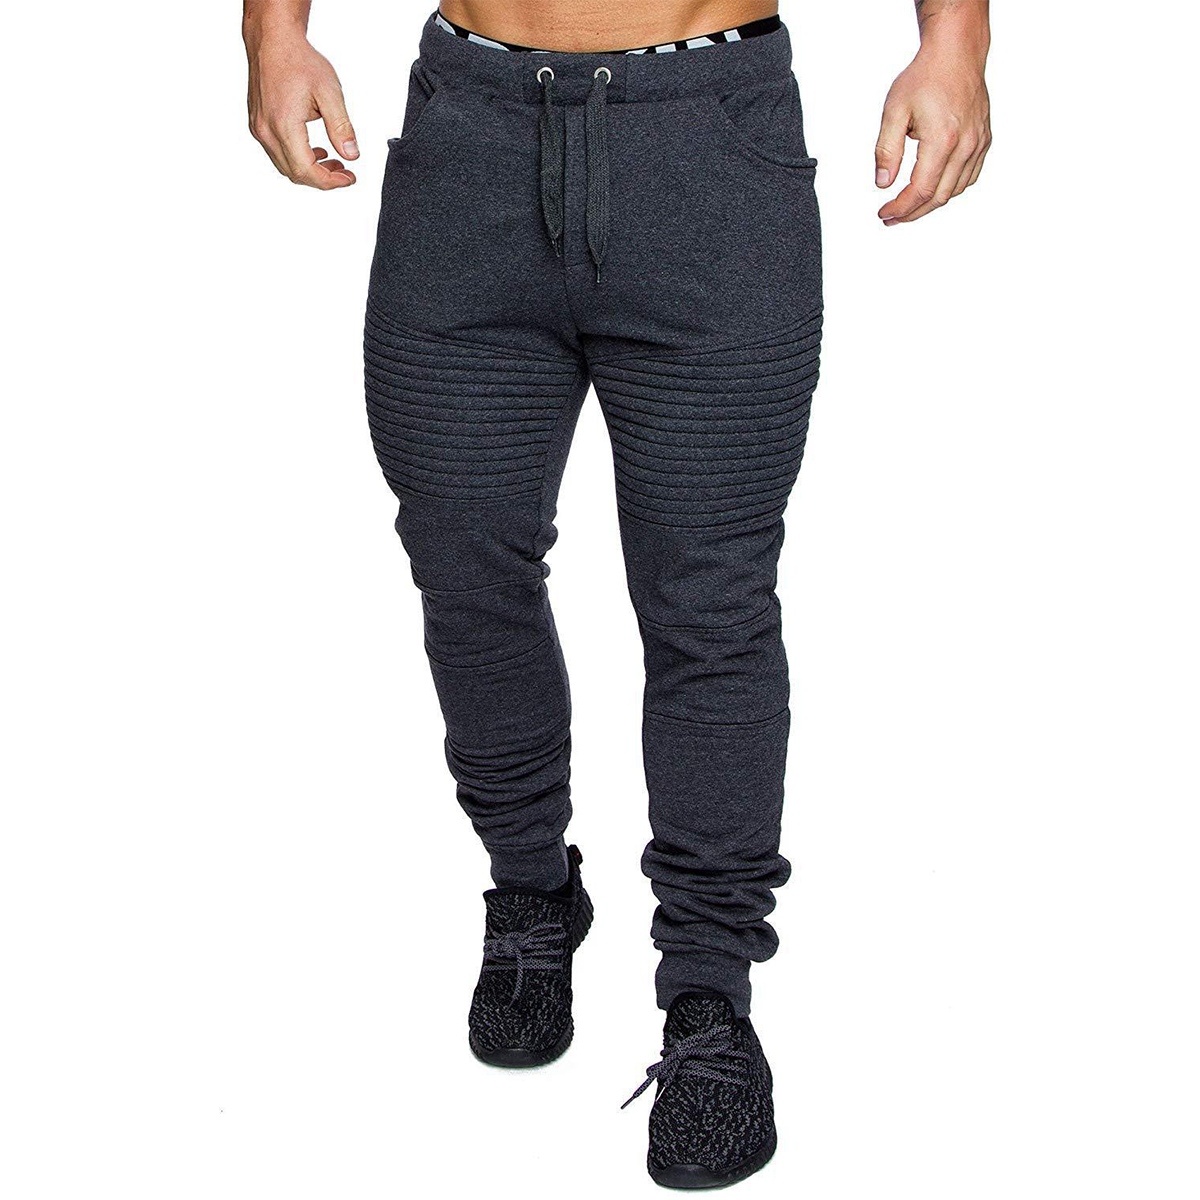 Men's Casual Sports Pants Striped Design Sports Fitness Trousers ...